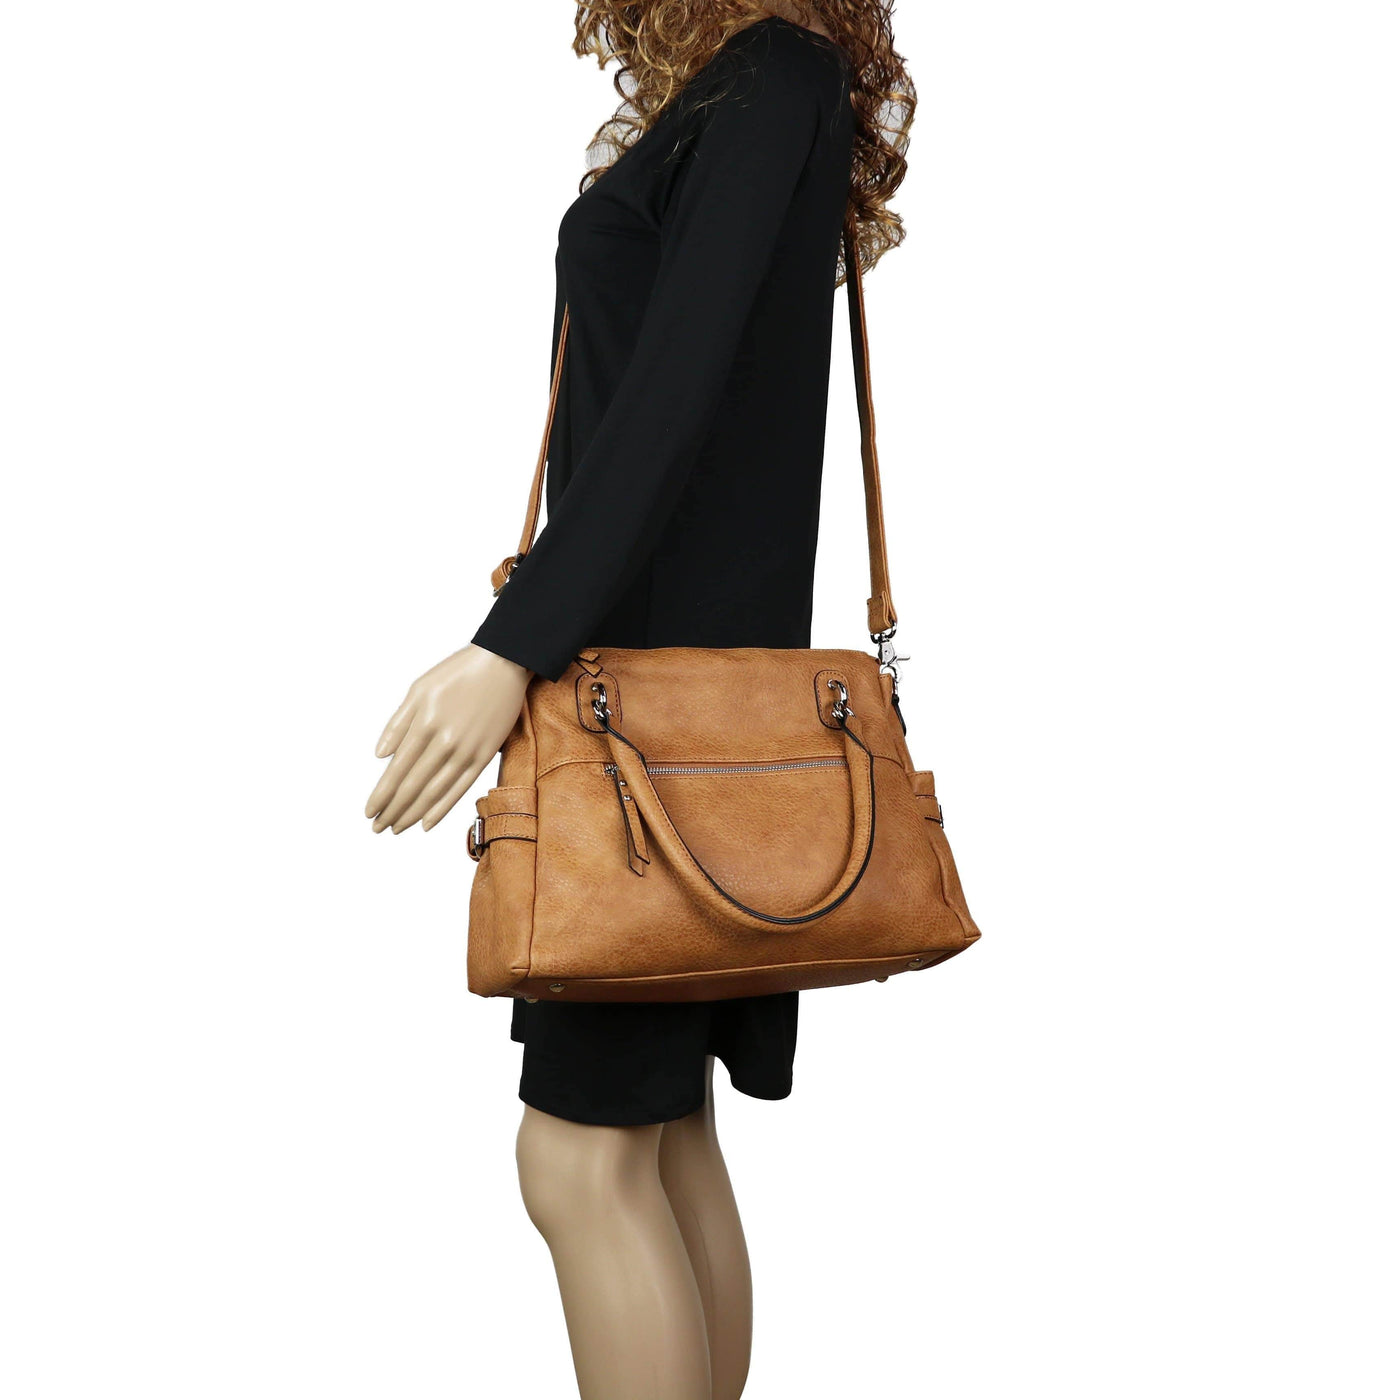 Concealed Carry Jessica Satchel Brown by Lady Conceal